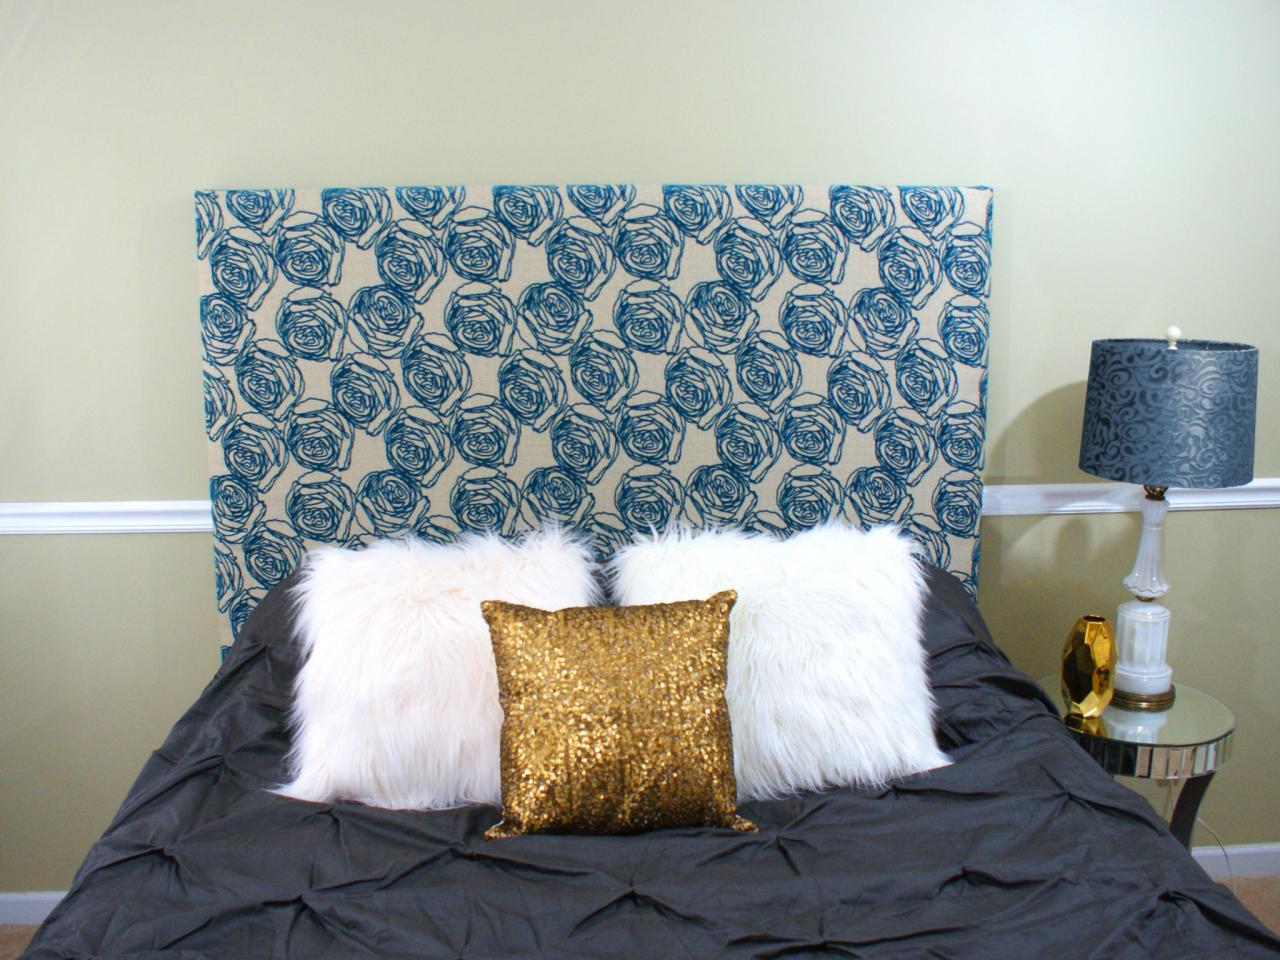 How To Upholster A Headboard For, Making A Headboard For King Size Bed